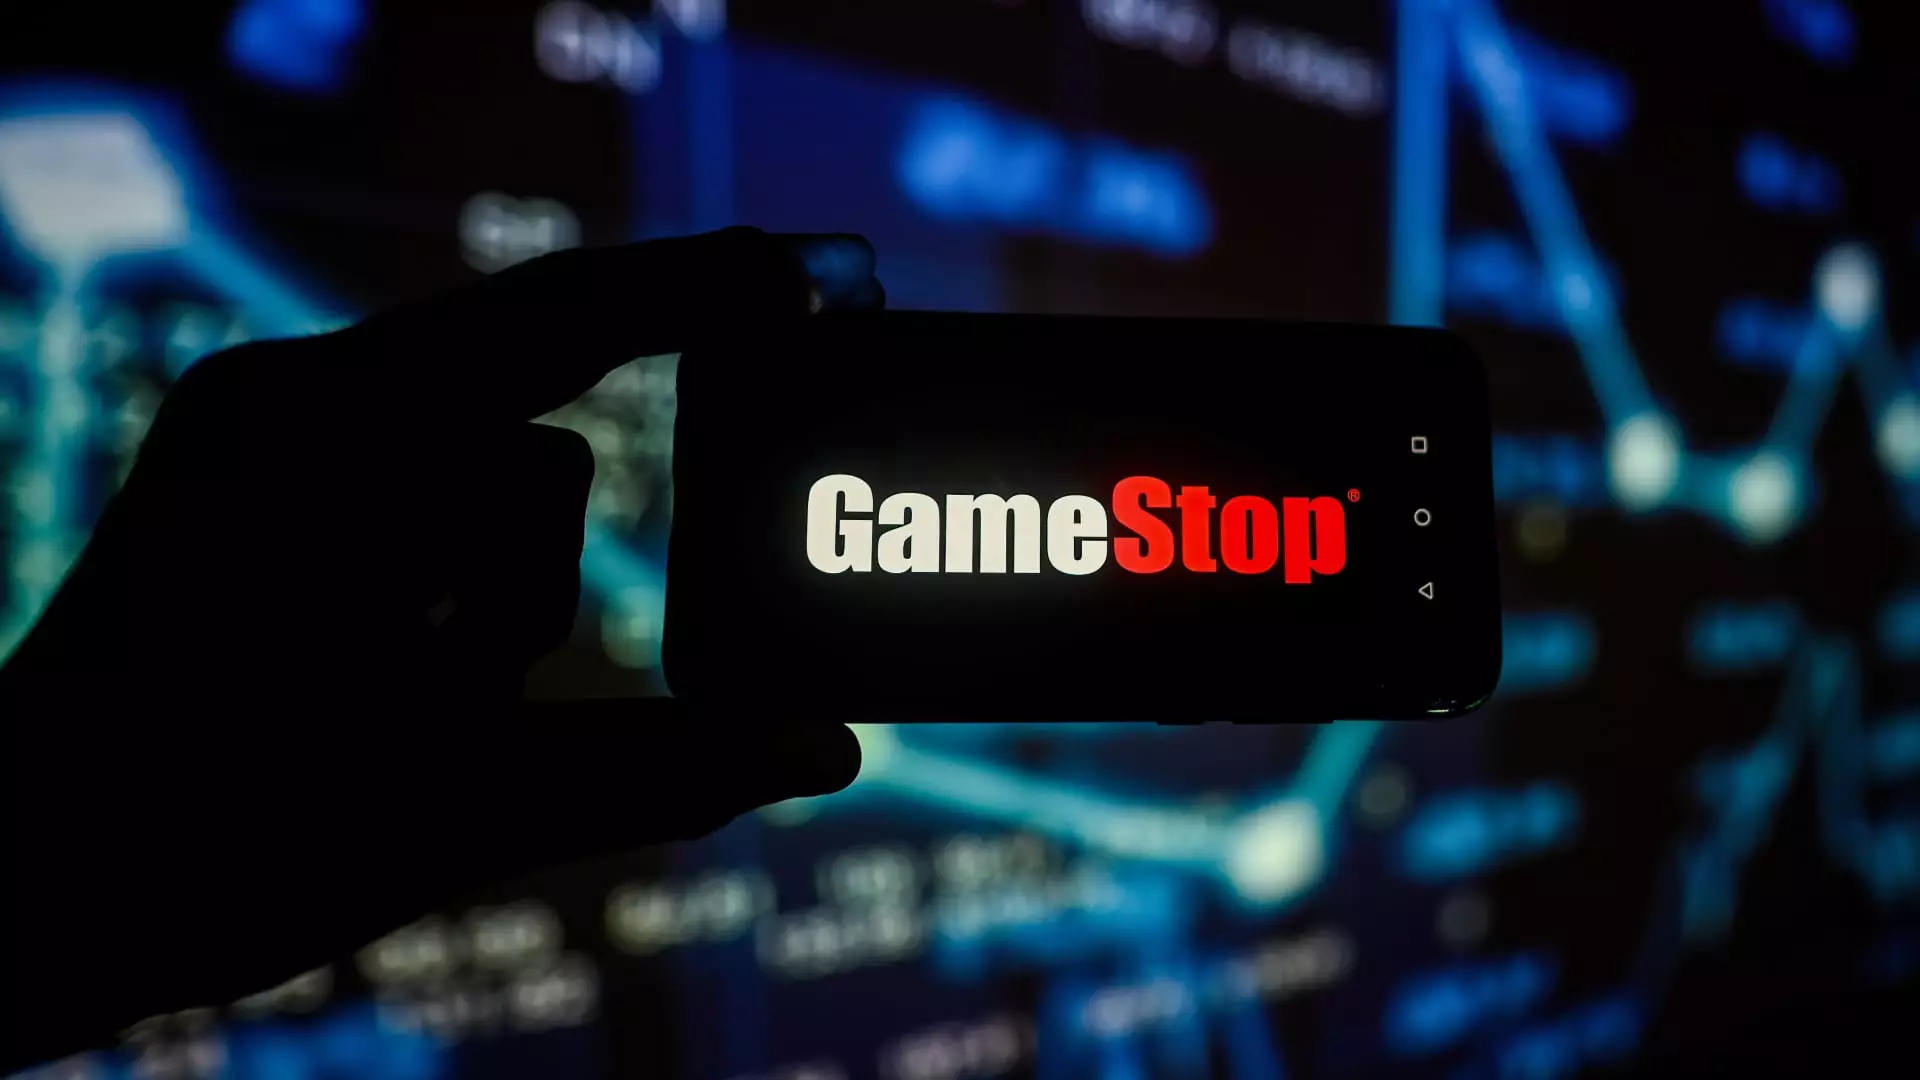 The Return of “Roaring Kitty” and the Speculative Rally in GameStop Shares